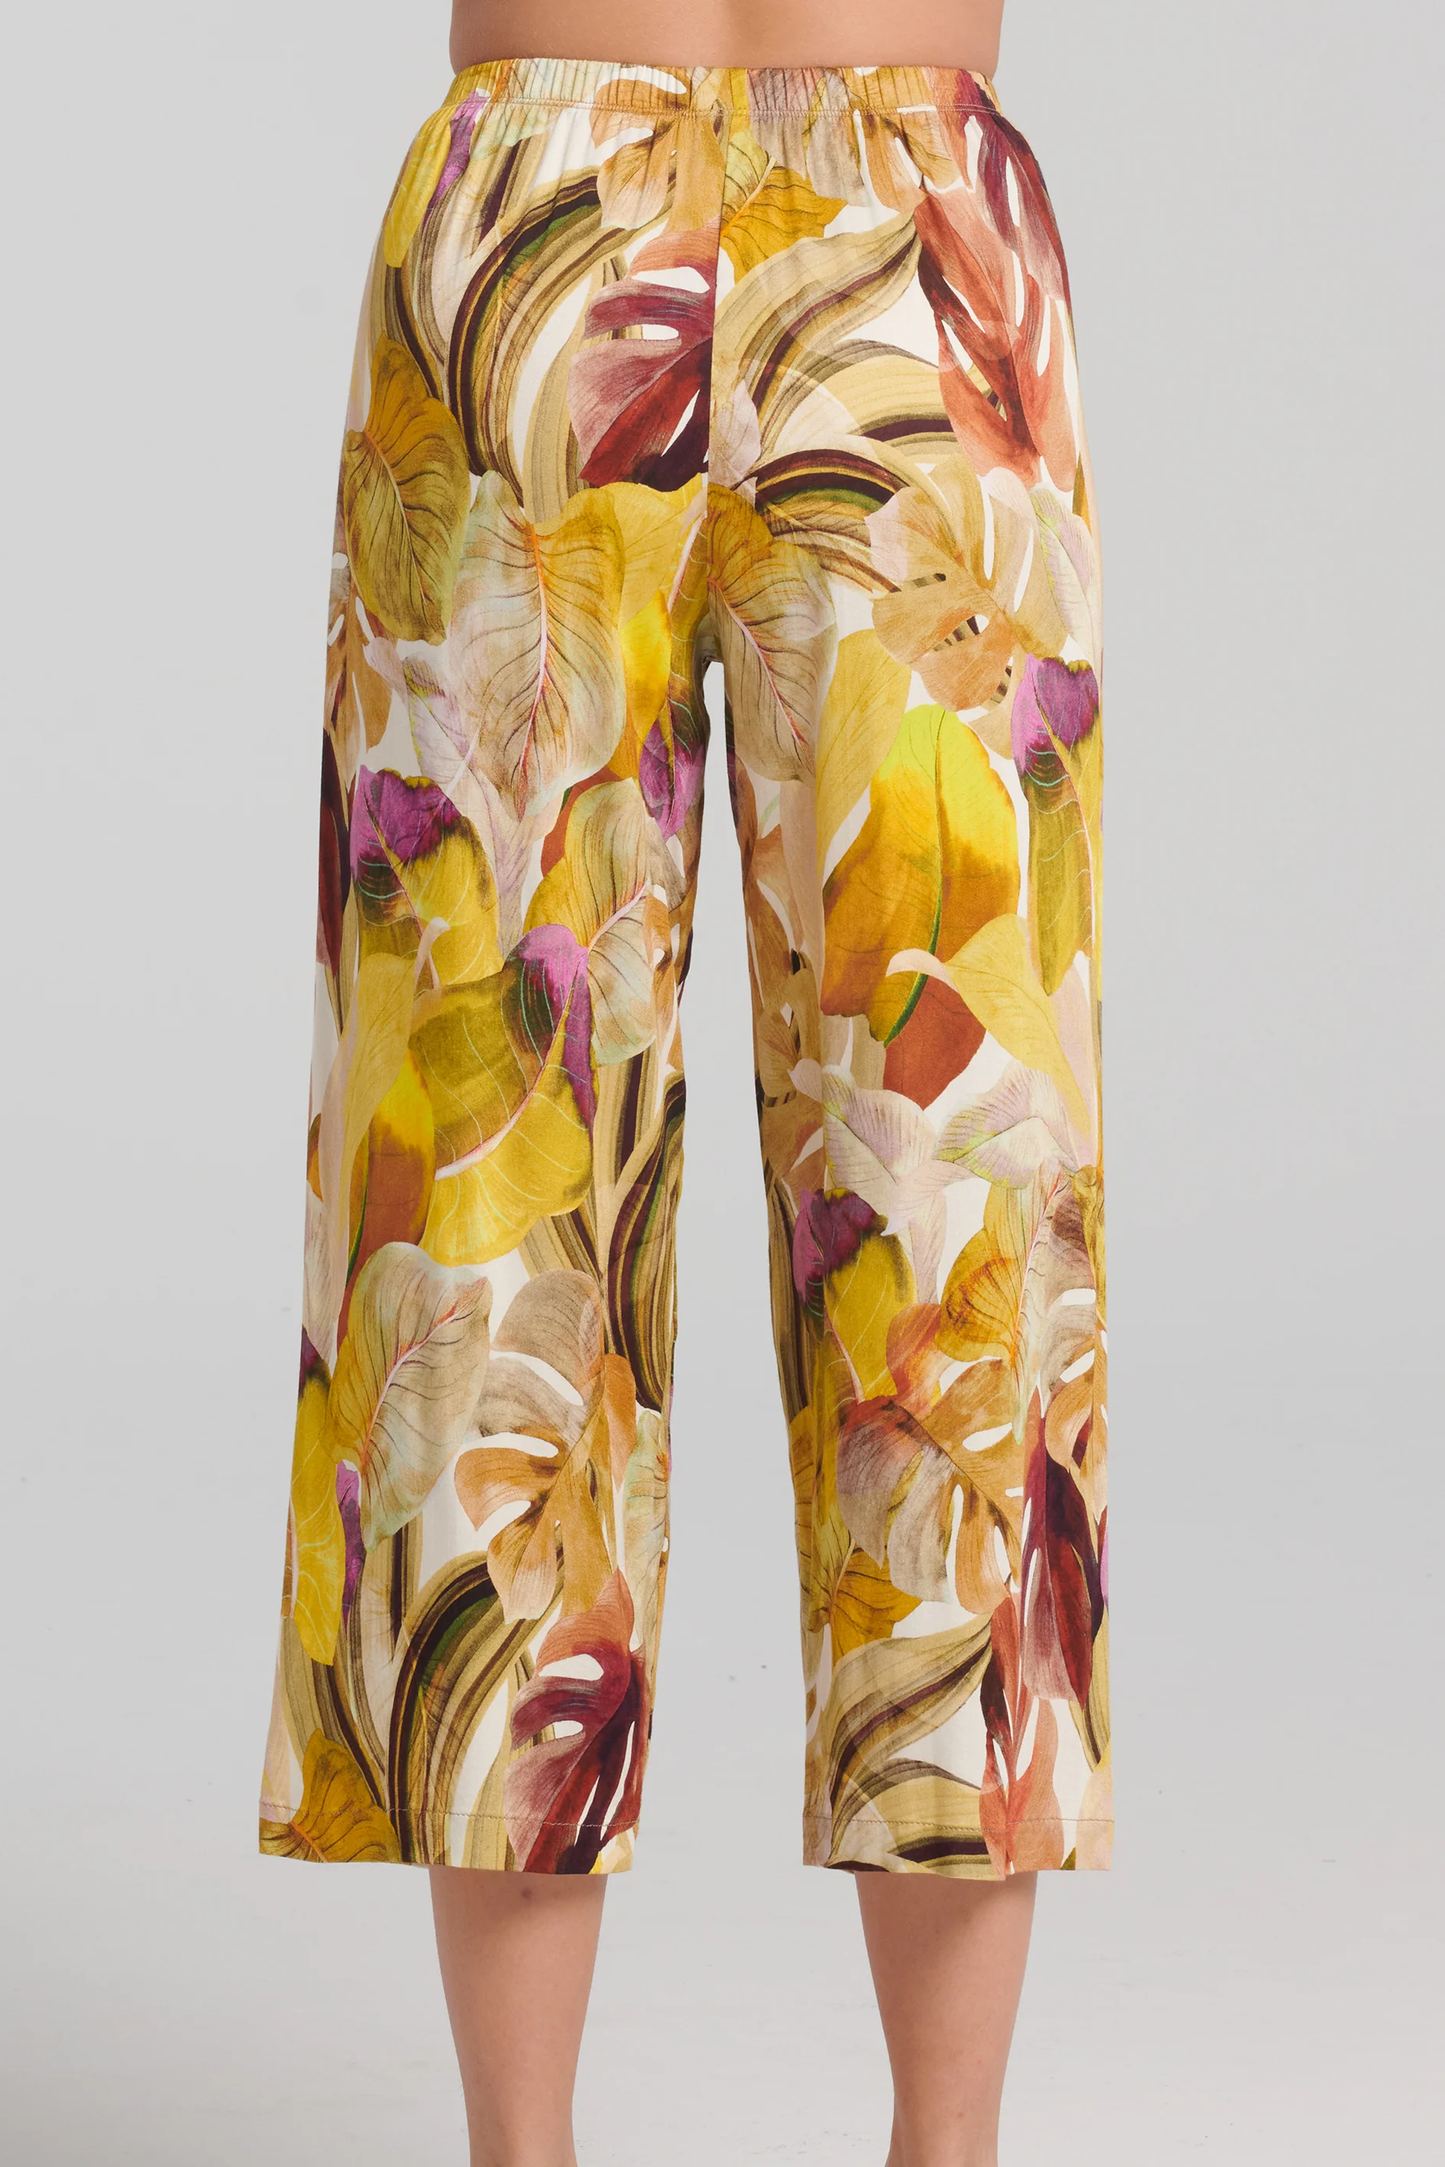 Anjea Pants by Kollontai, Yellow, back view, botanical print, elastic waist, cropped length, slightly wide legs, sizes XS to XXL, made in Montreal 